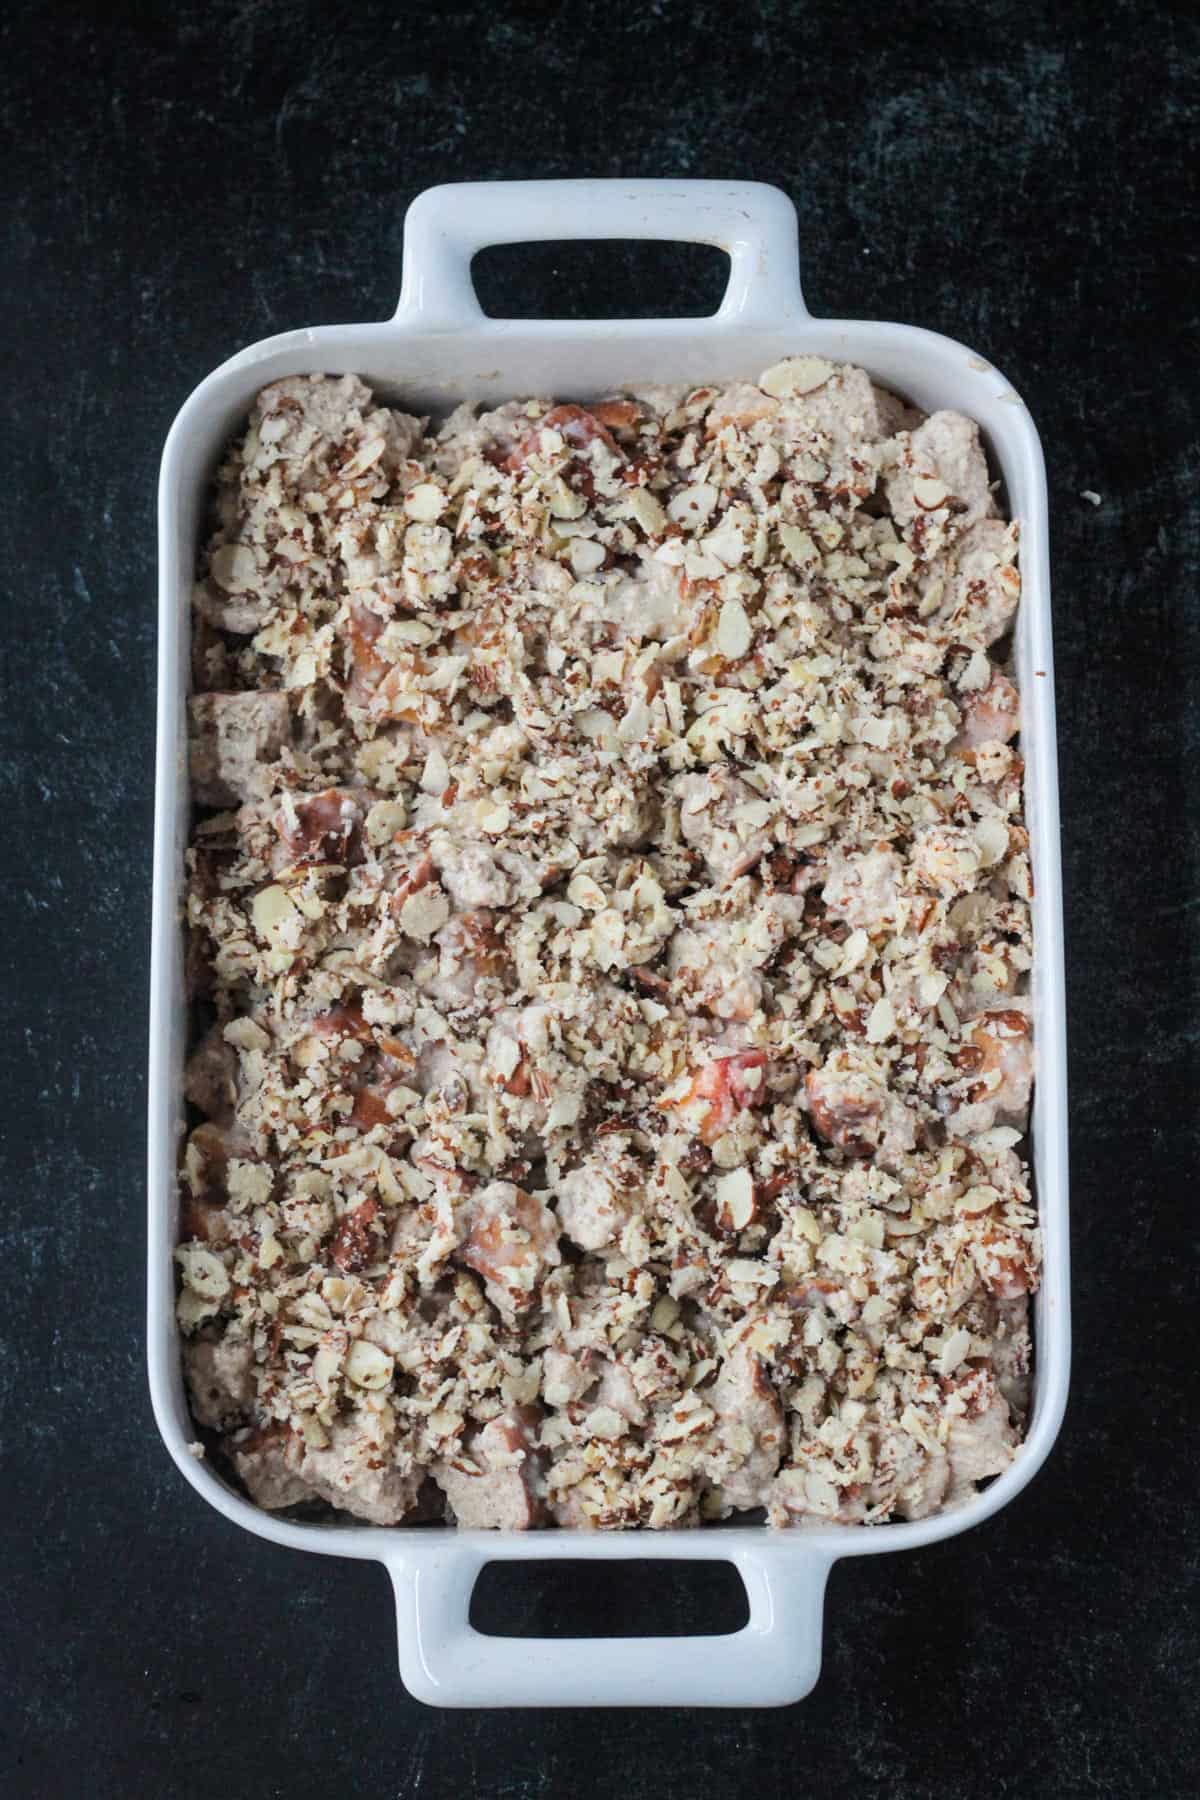 Unbaked casserole with an almond streusel topping.